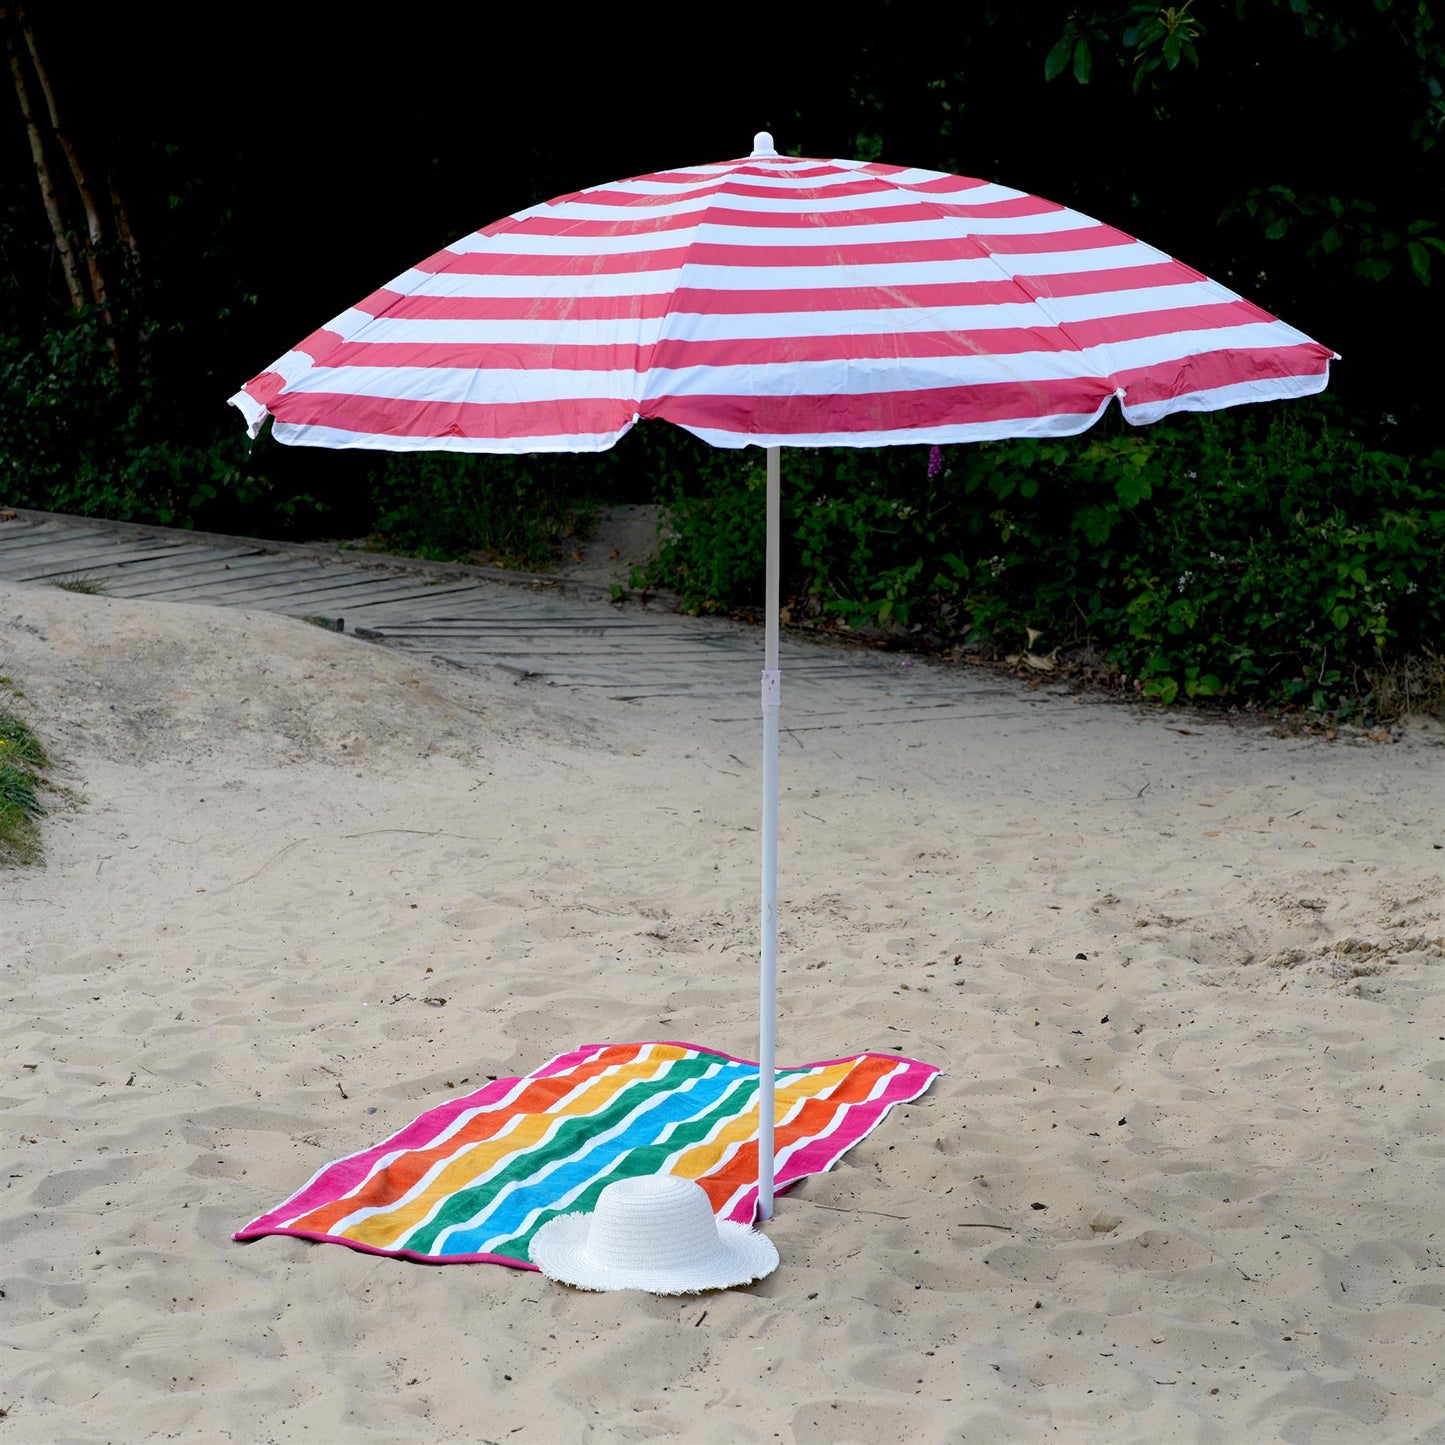 Red Garden Parasol 1.7m by The Magic Toy Shop - UKBuyZone